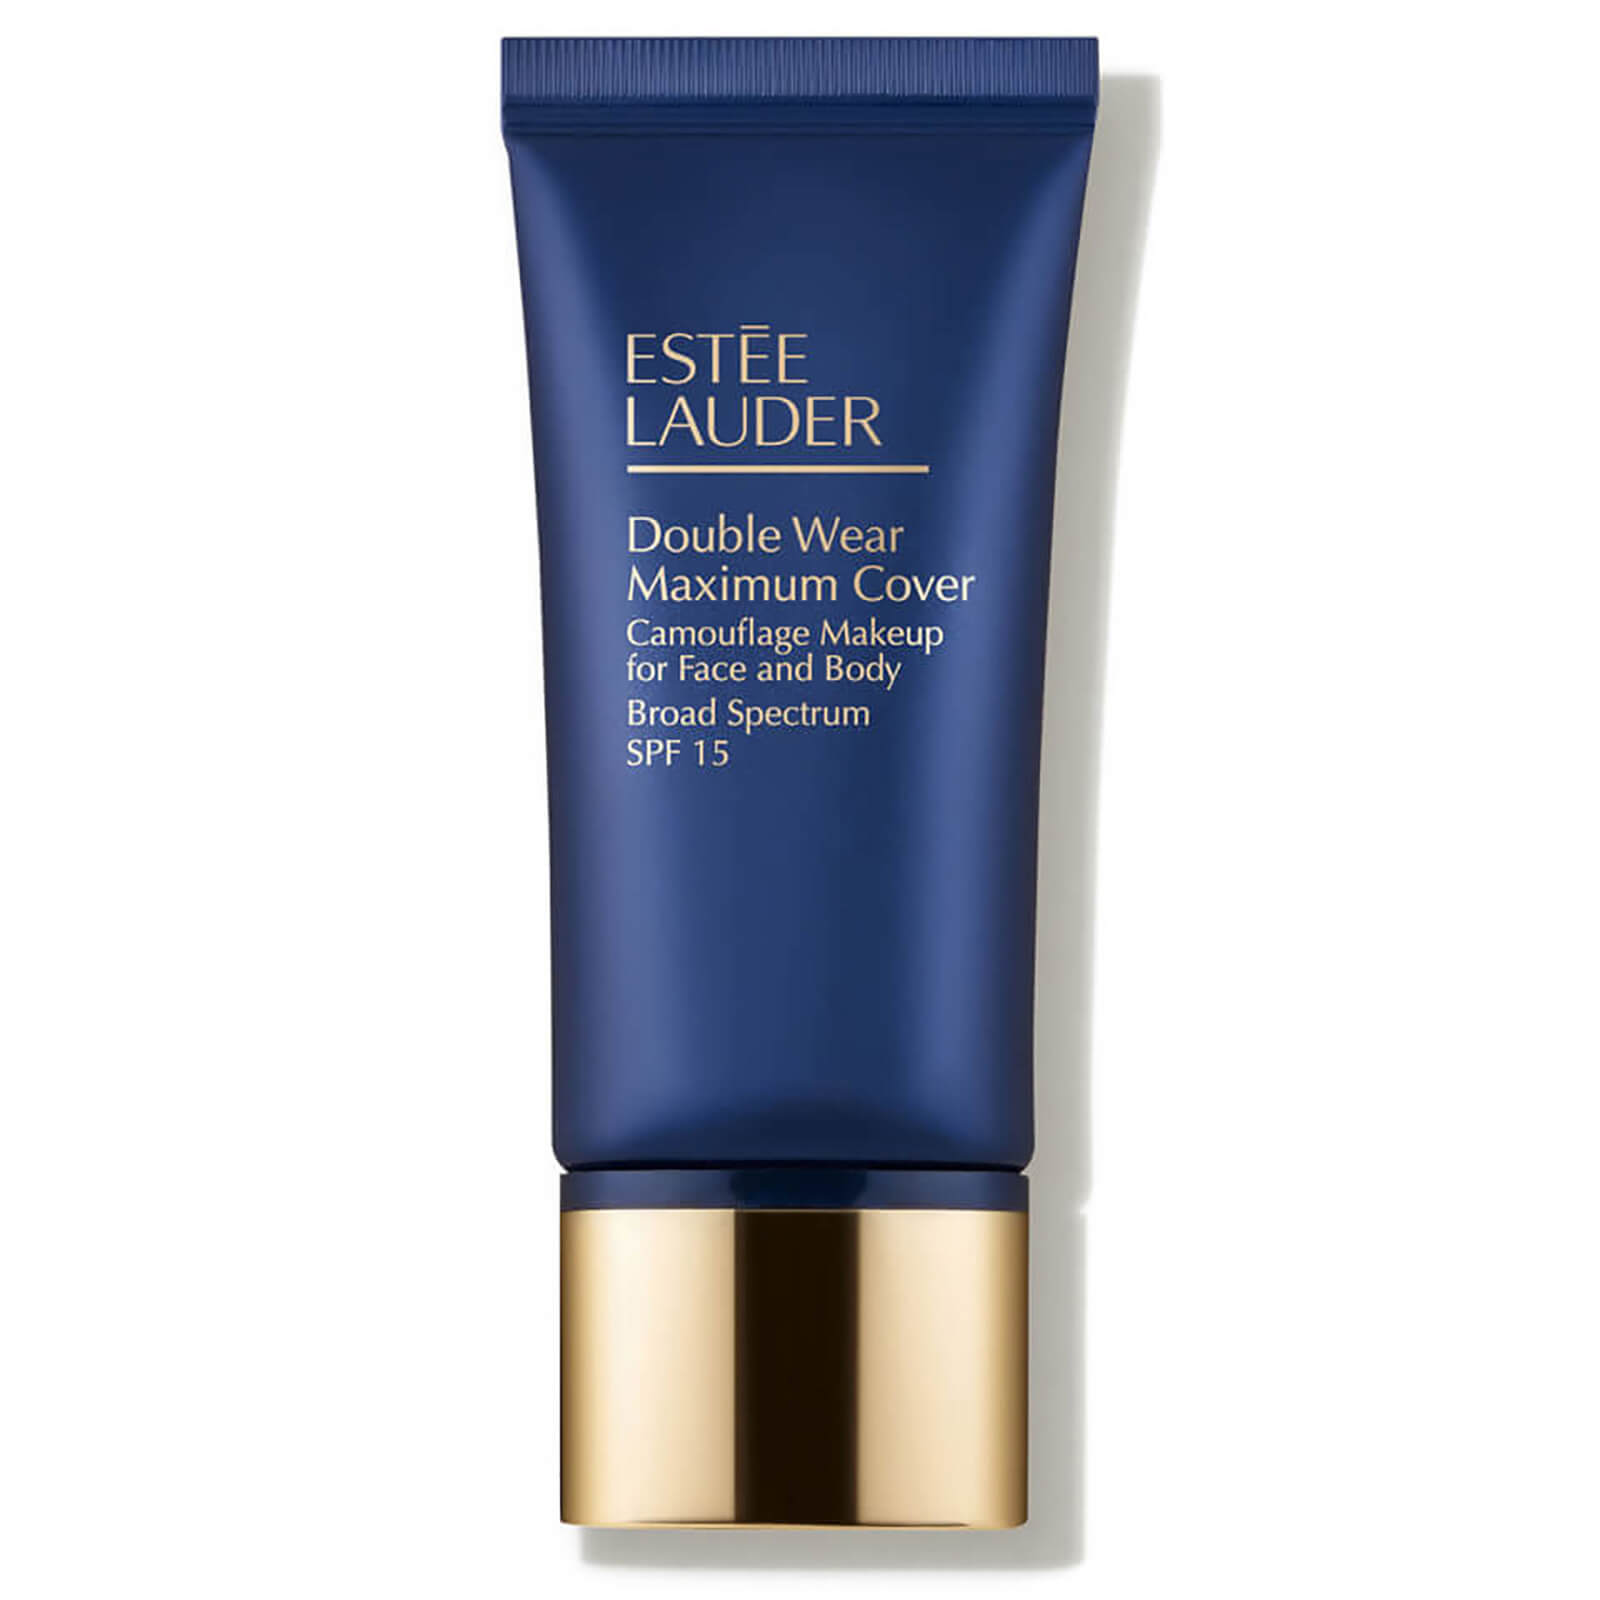 Estée Lauder Double Wear Maximum Cover Camouflage Makeup For Face And Body Spf 15 (1 Oz.) In 6w1 Sandalwood